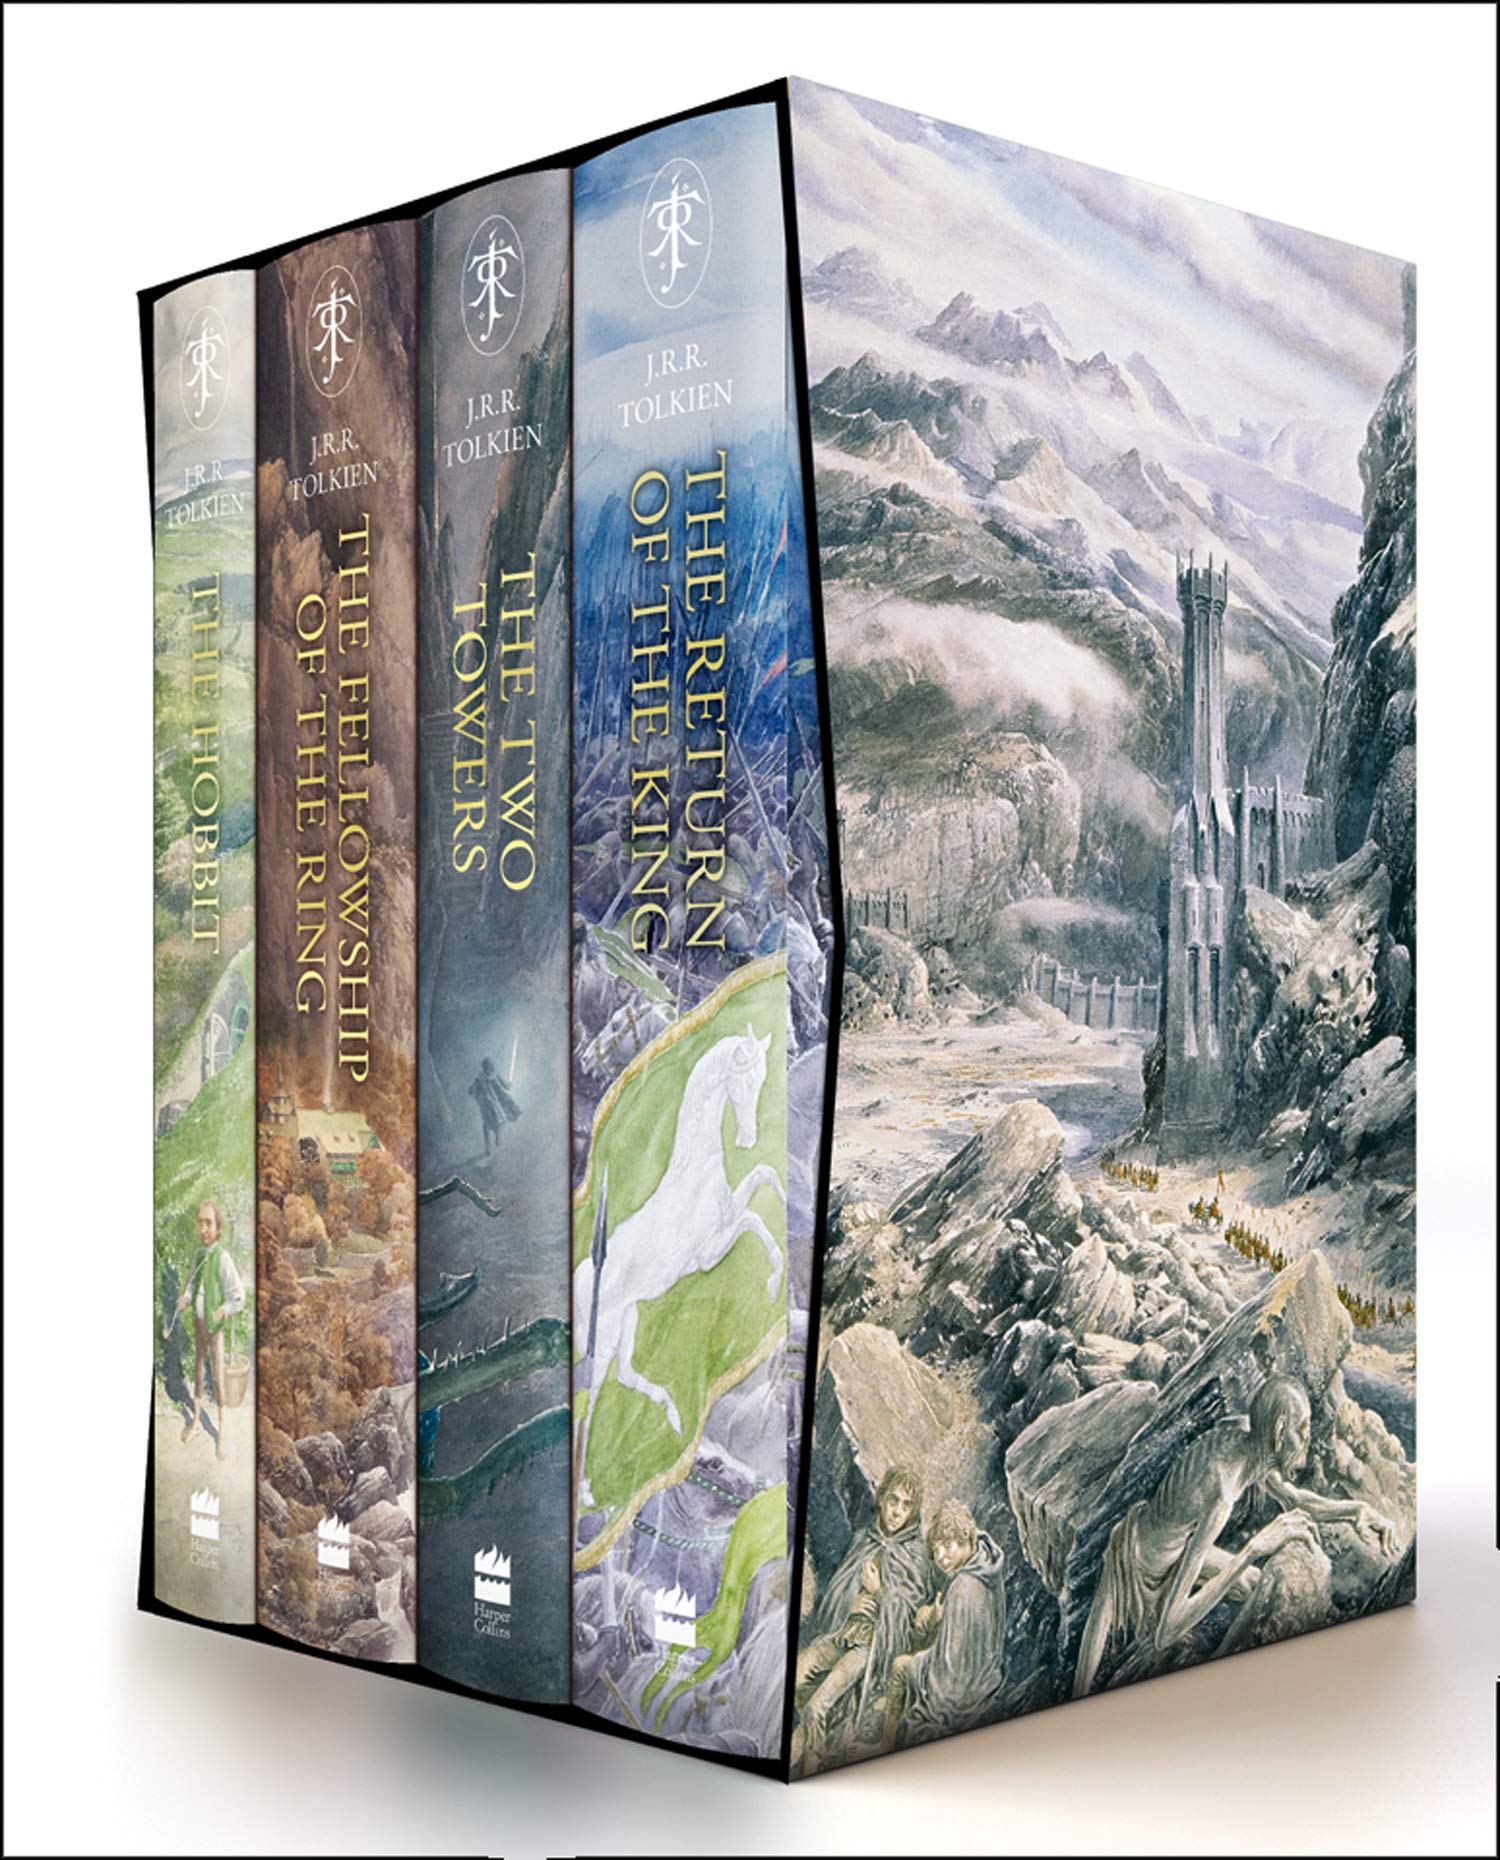 TCG - The Lord of the Rings, Alan Lee illustrated May 2020